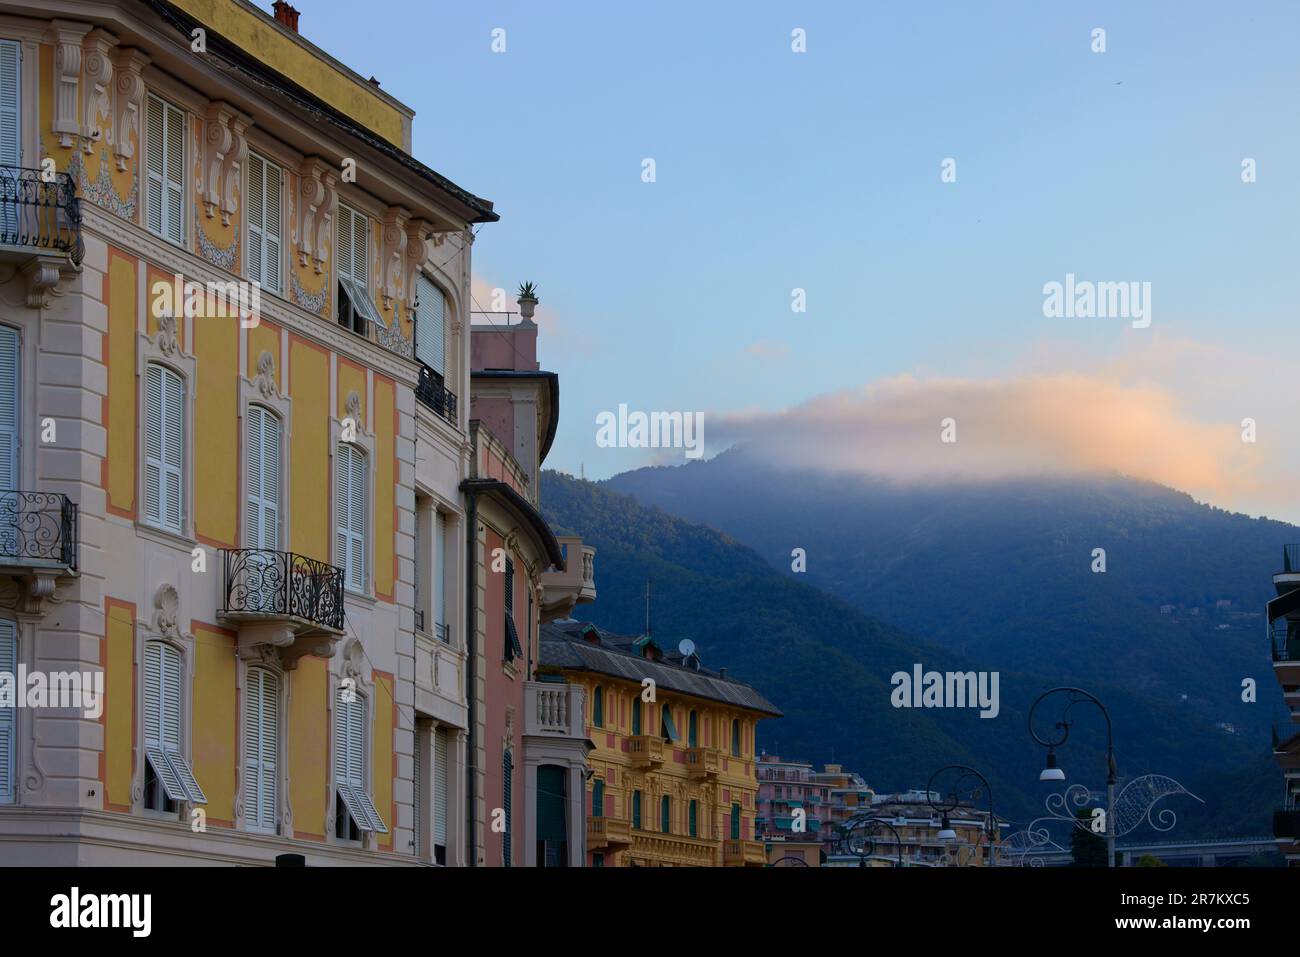 Colourful buildings and cloud over mountain at dawn, Rapallo, Liguria, Italy Stock Photo